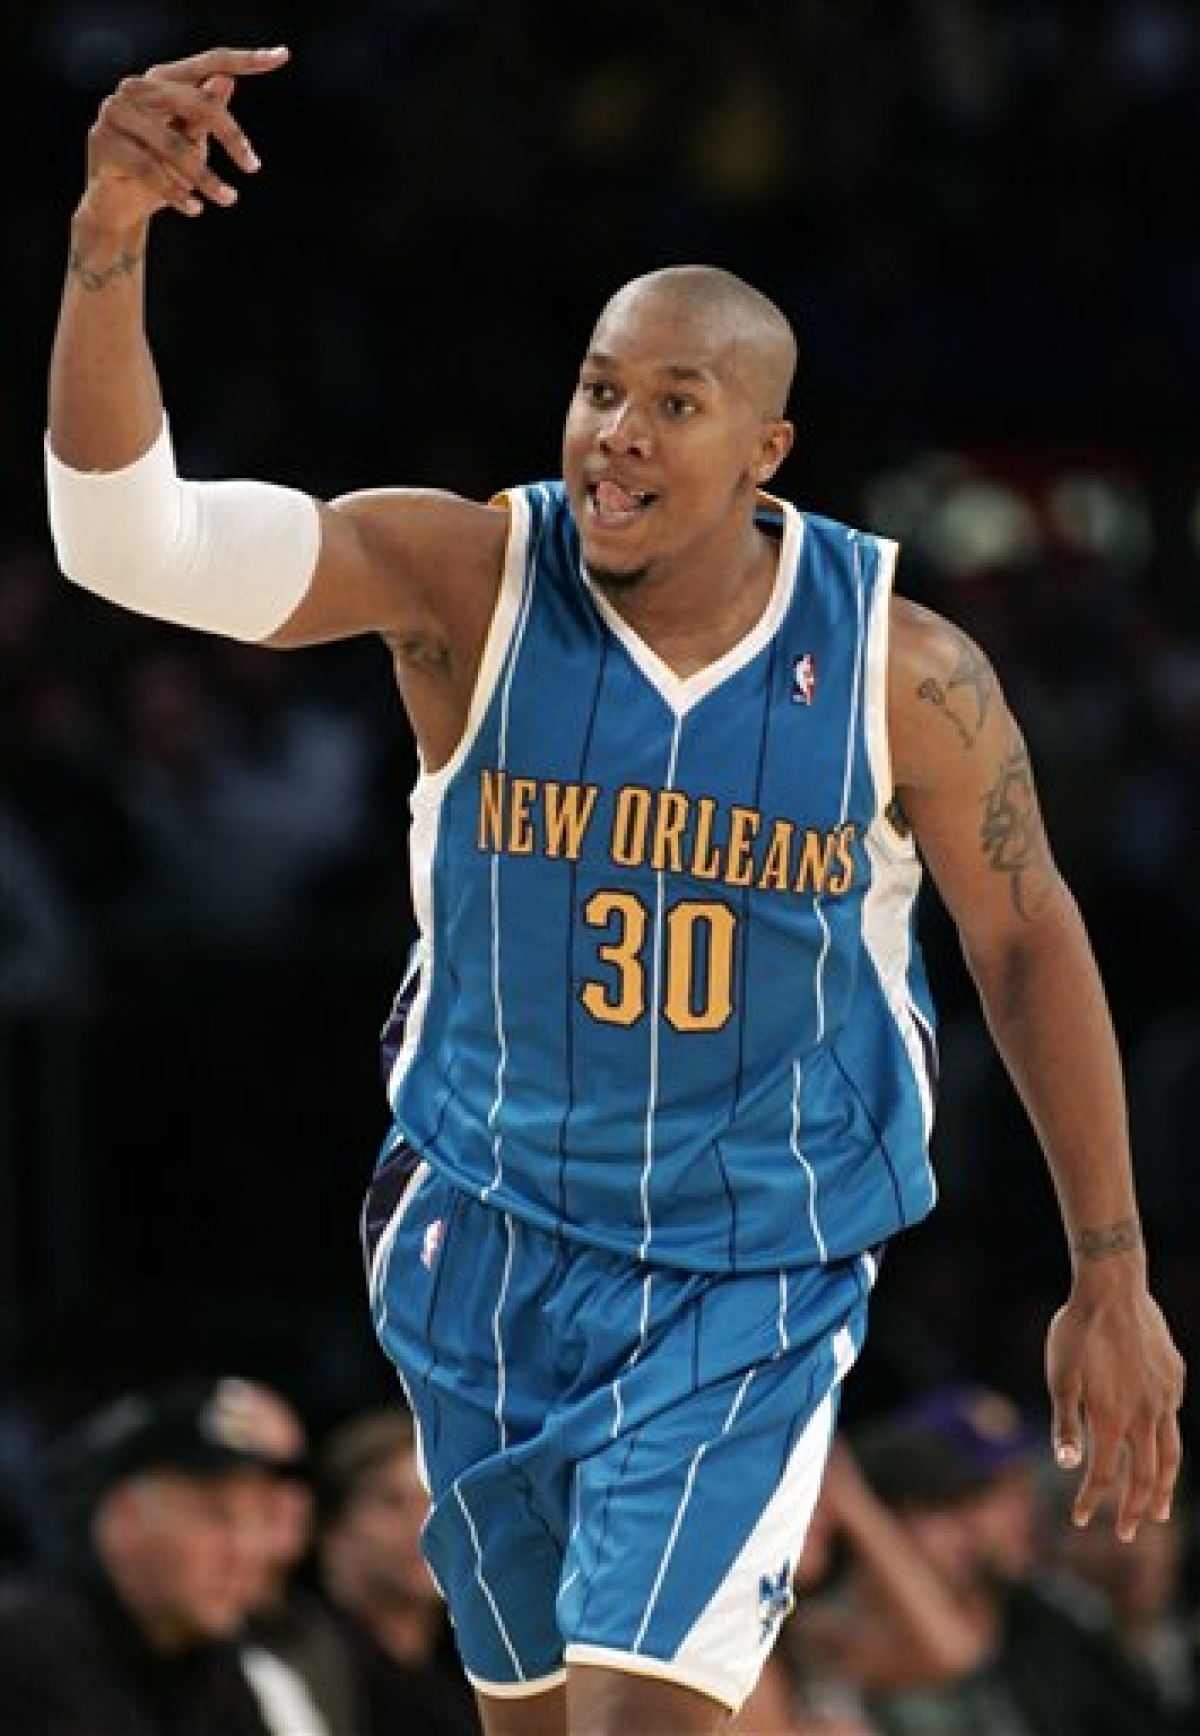 Not in Hall of Fame - David West